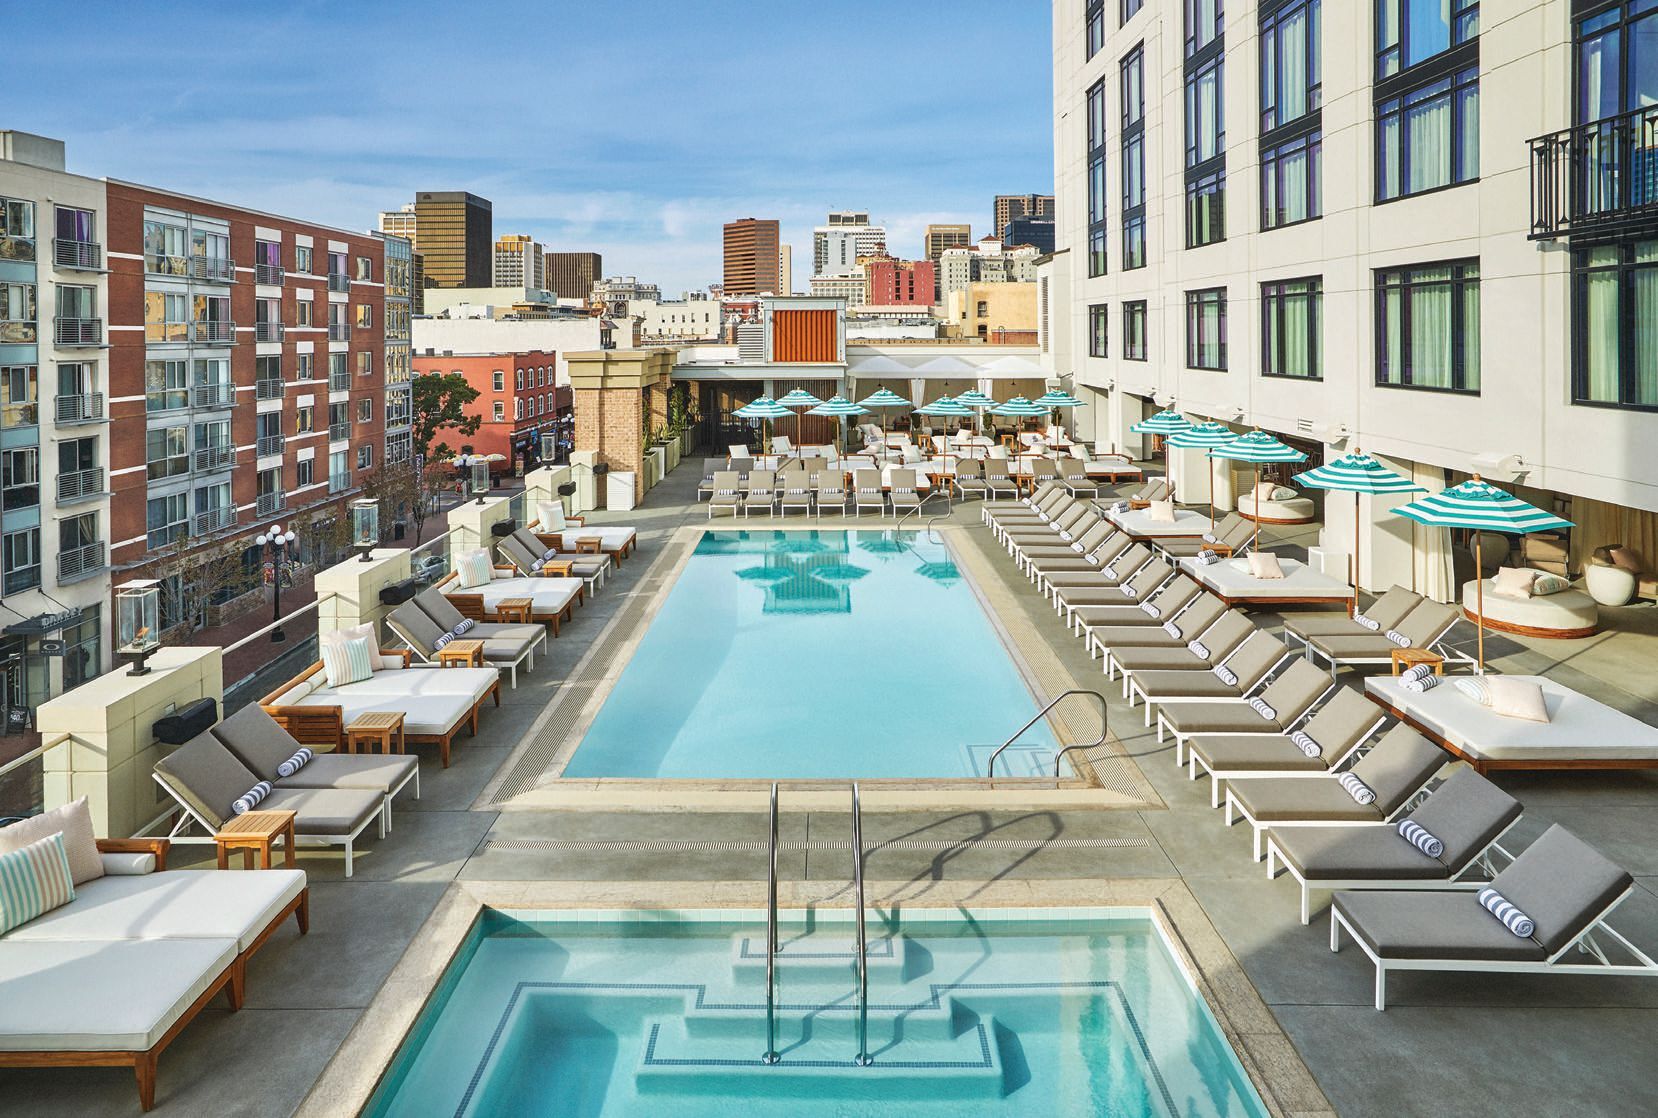 Take a dip at Pendry San Diego’s rooftop pool PHOTOS COURTESY OF BRANDS